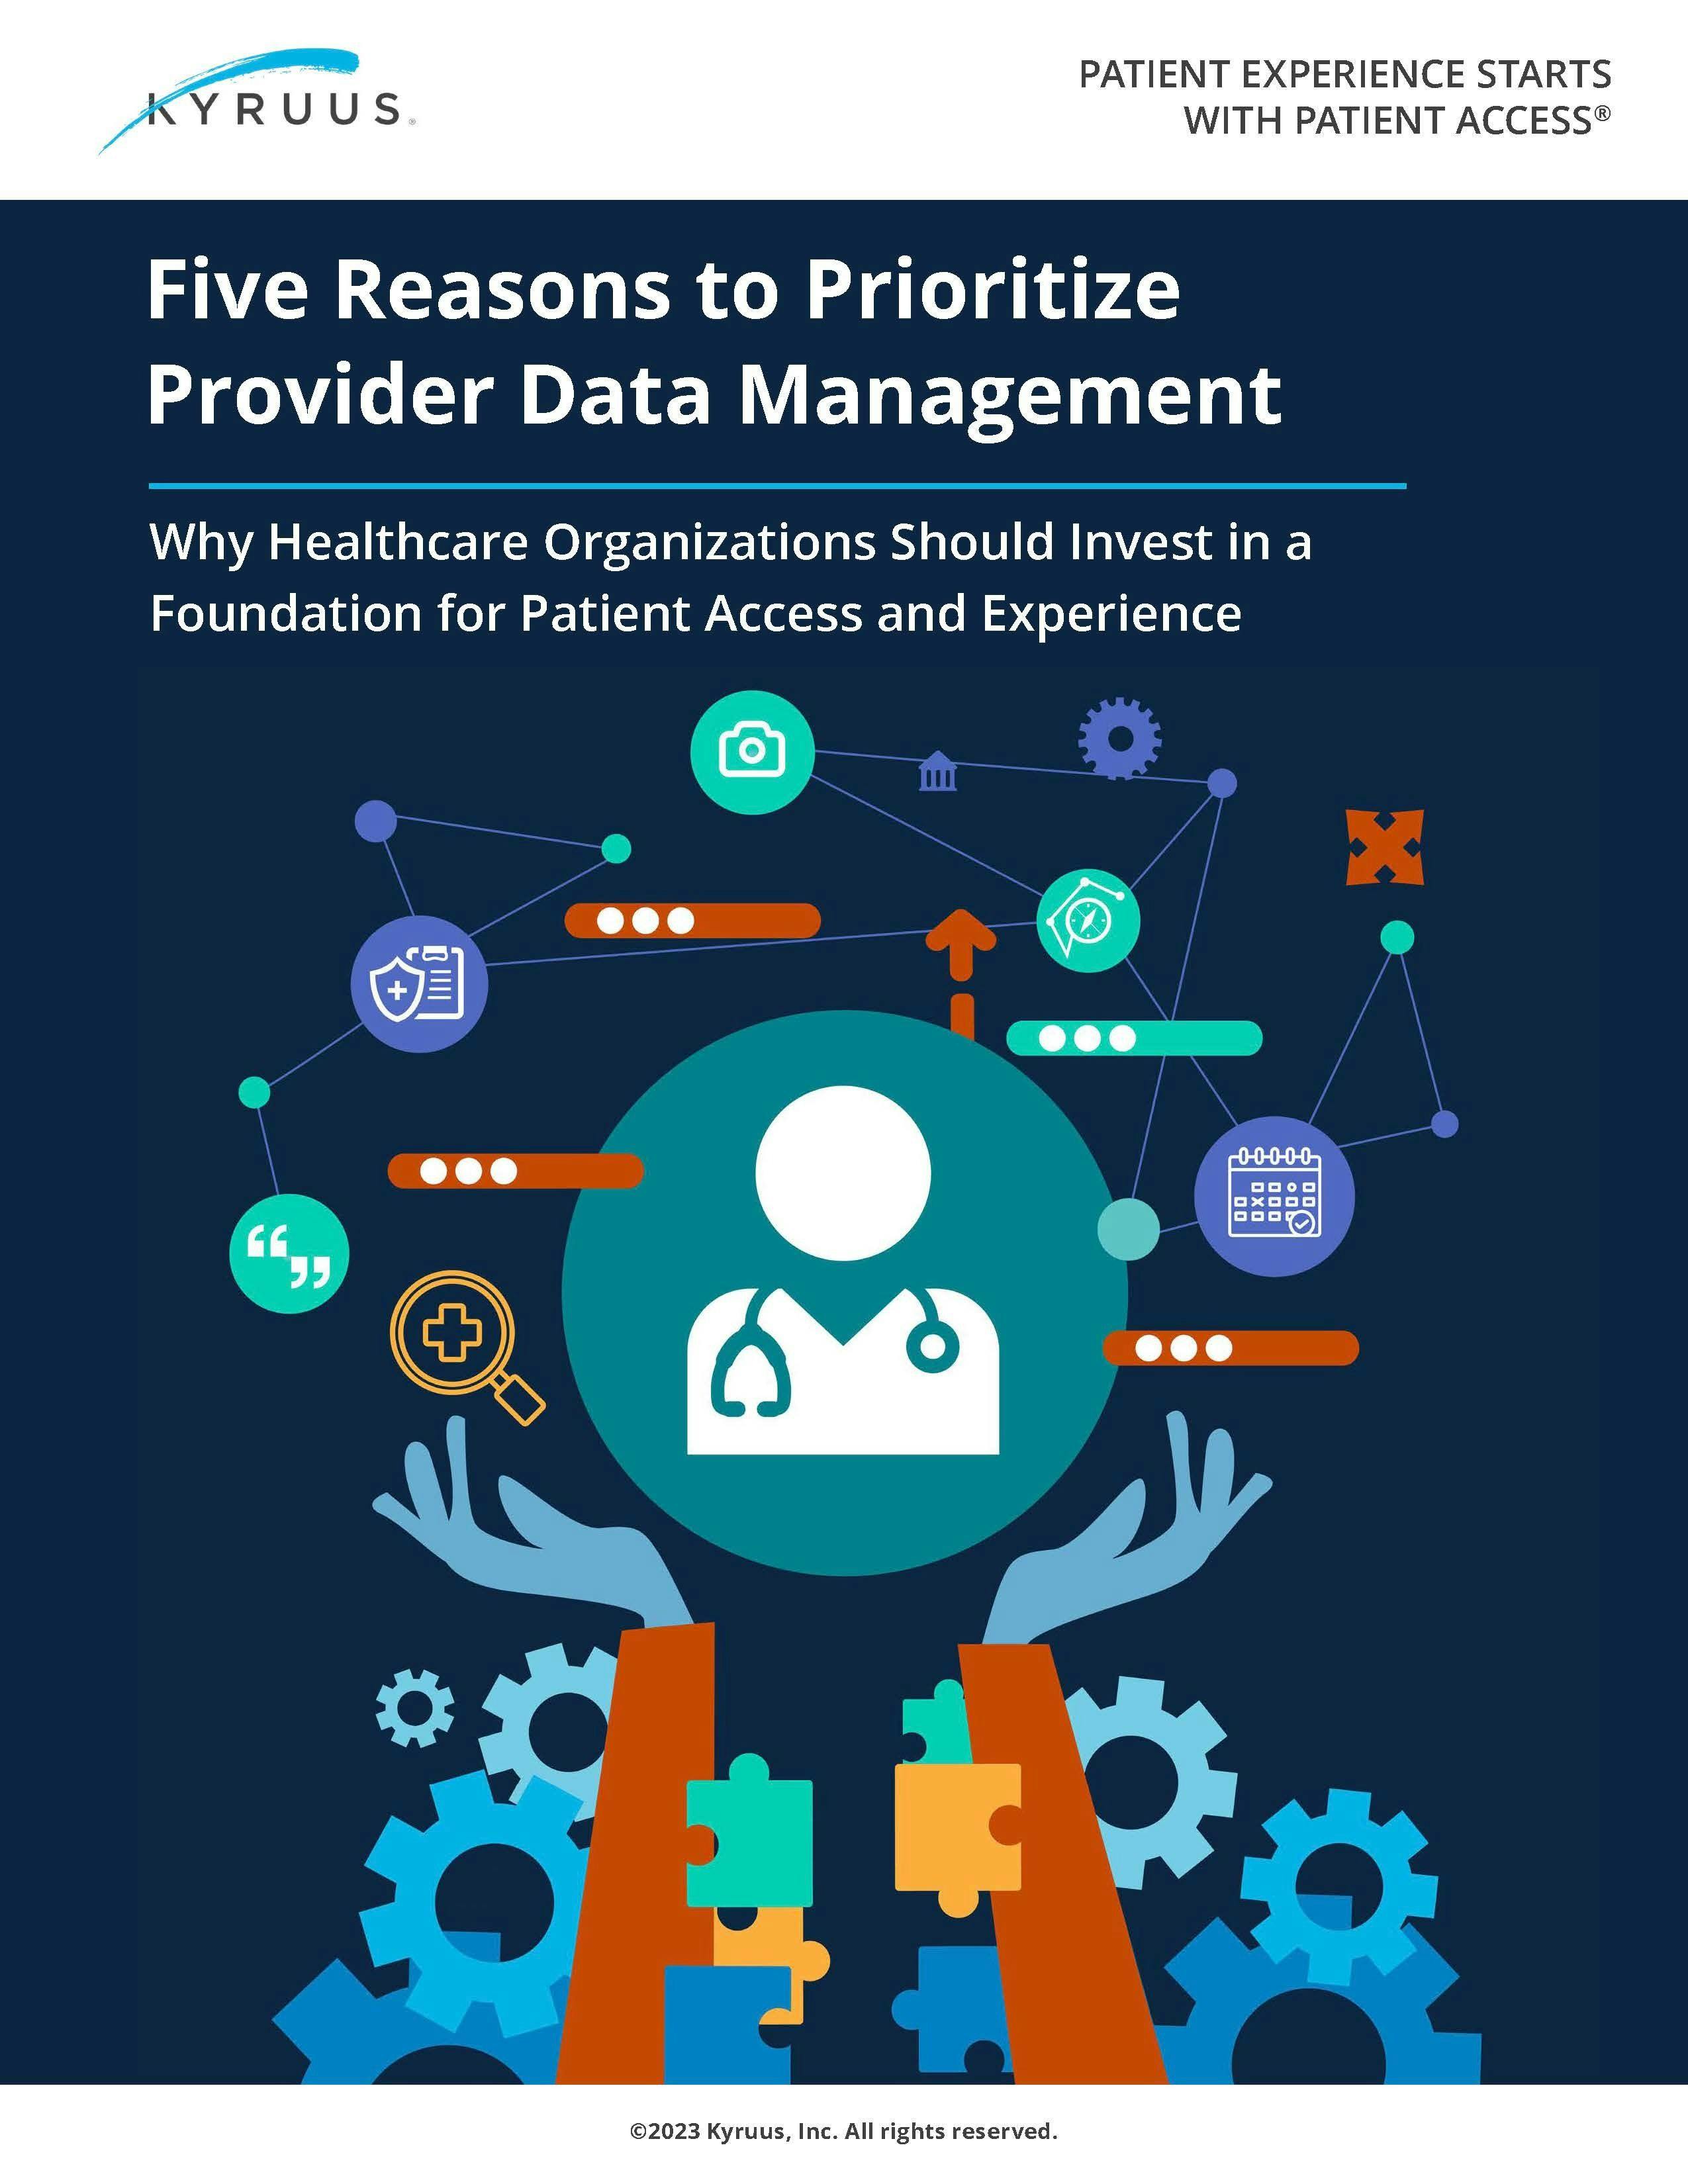 Five Reasons to Prioritize Provider Data Management